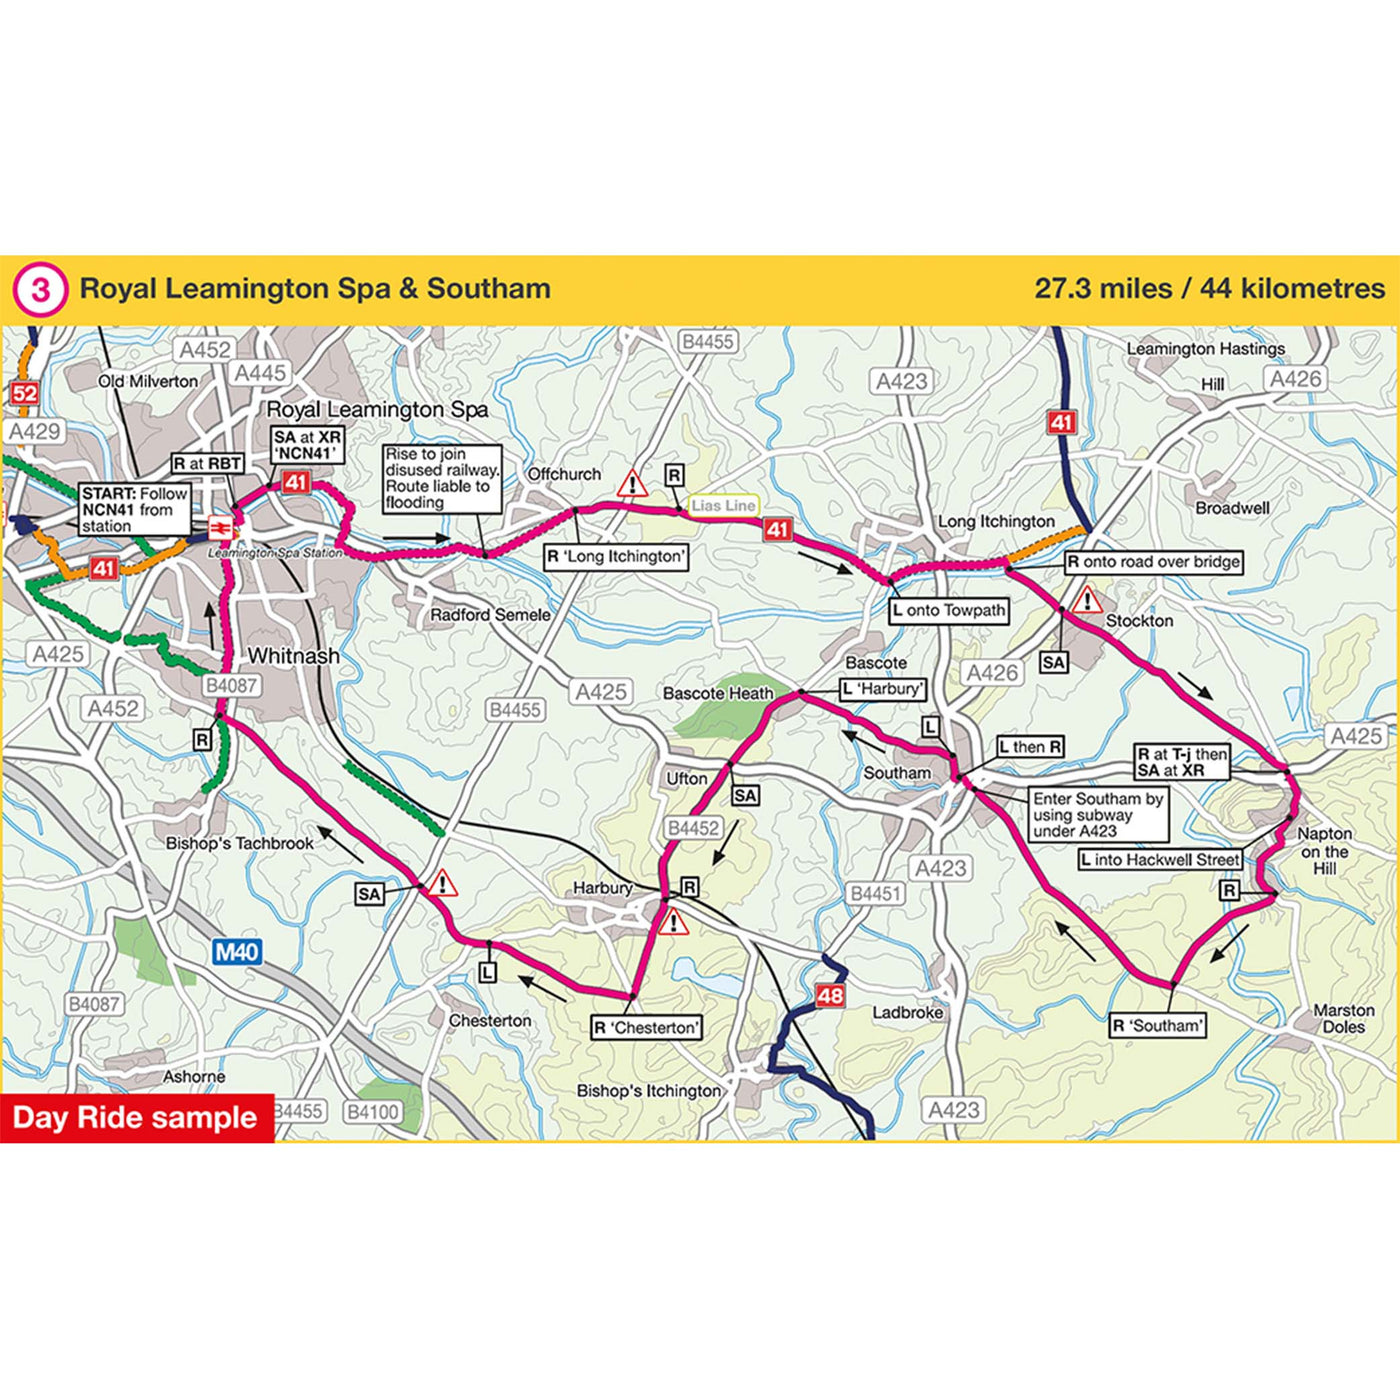 Day ride sample covering Royal Leamington Spa and Southam. 27.3 mile circular cycle route. 